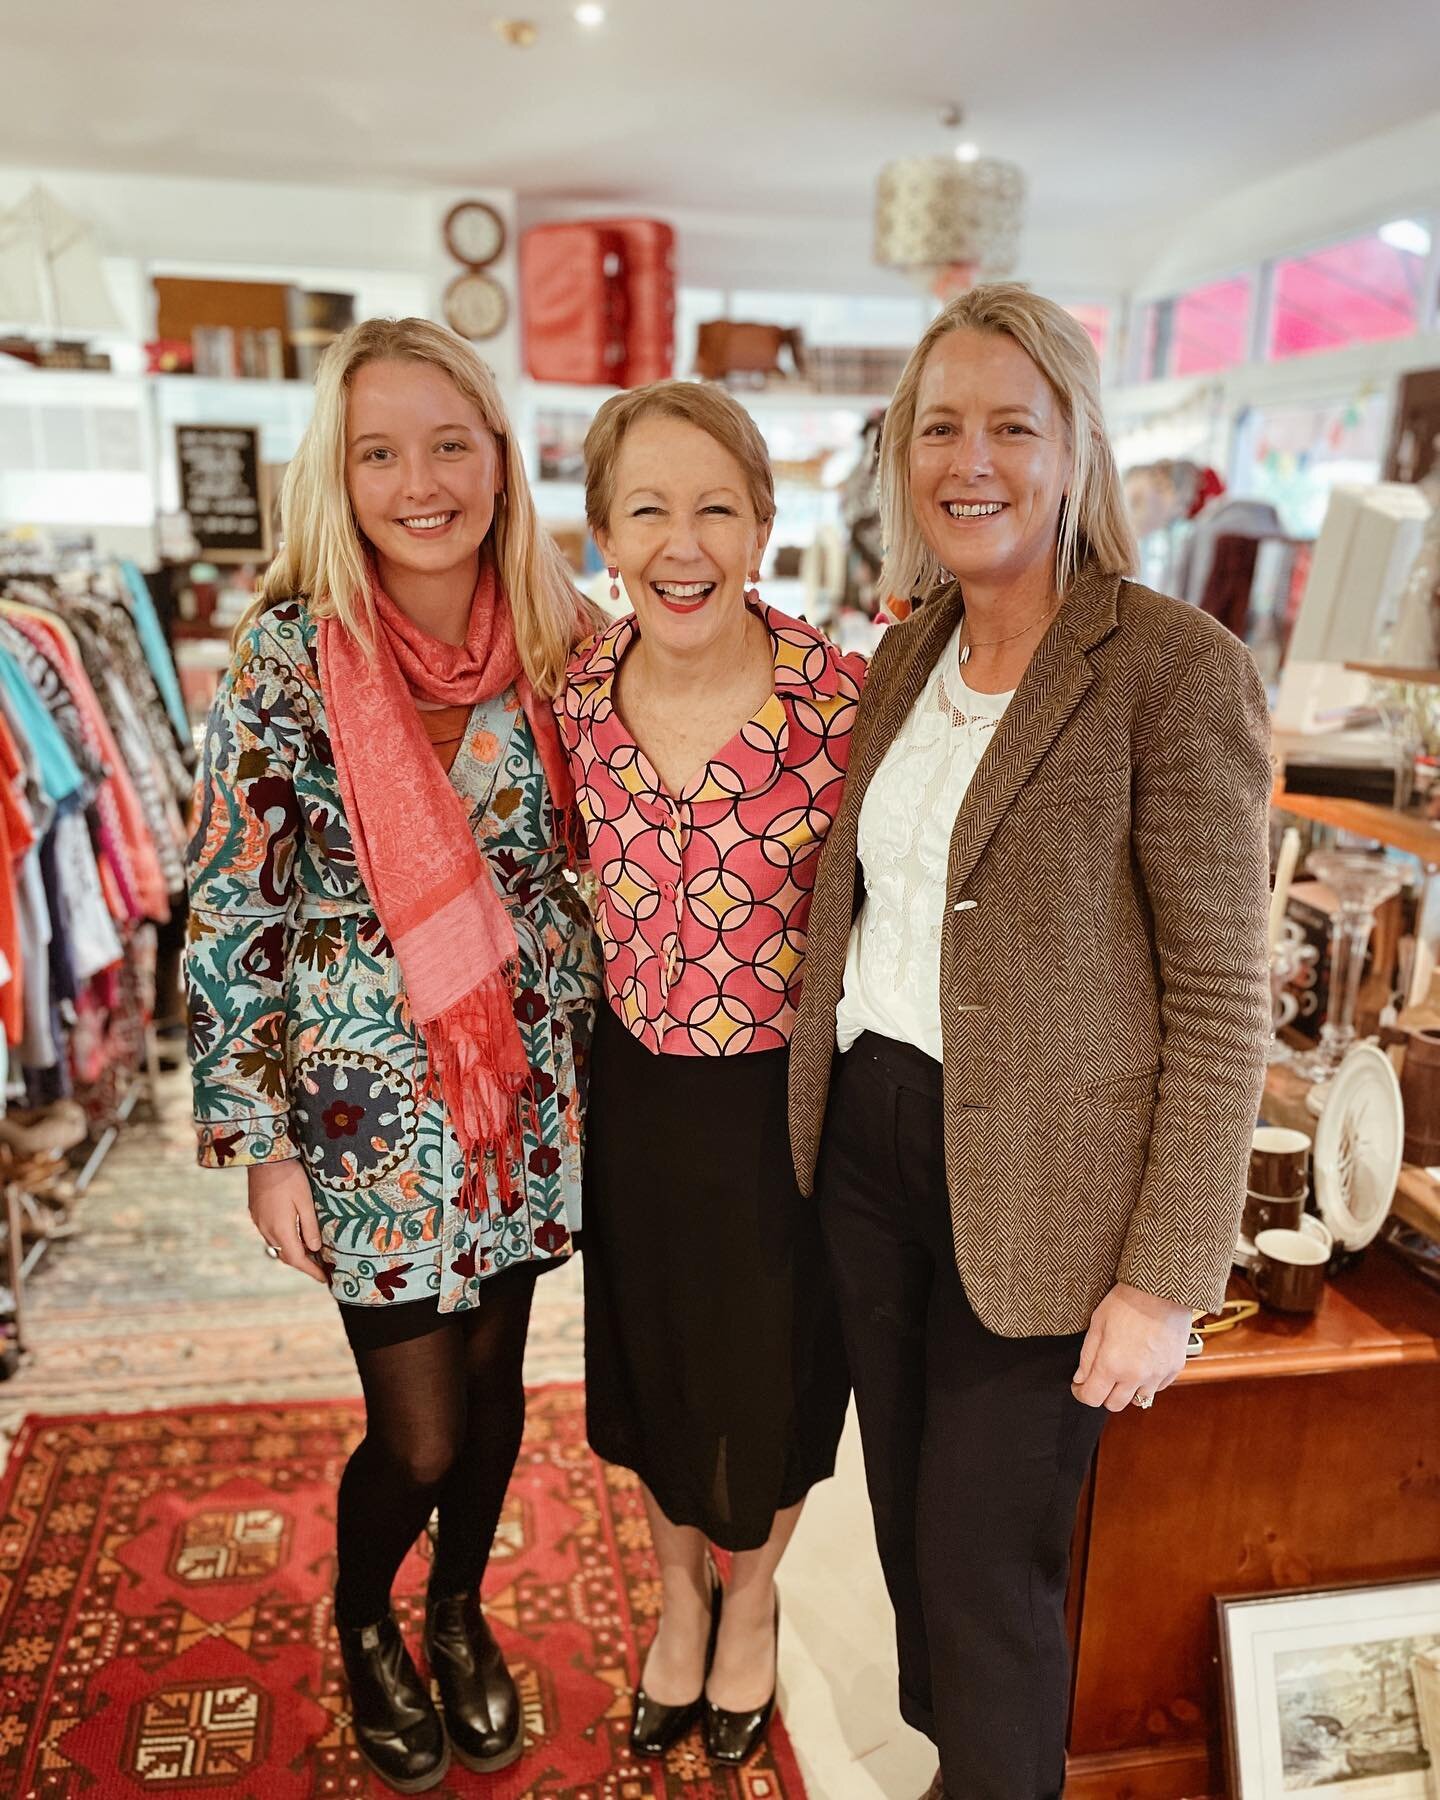 We were thrilled to have the delightful Di Farmer visit our beloved shop! ❤️ 

We were able to talk about our big upcoming plans for Do-Op and Di had some great suggestions on charities &amp; projects we can support in the area. 

👉🏻 At the moment 